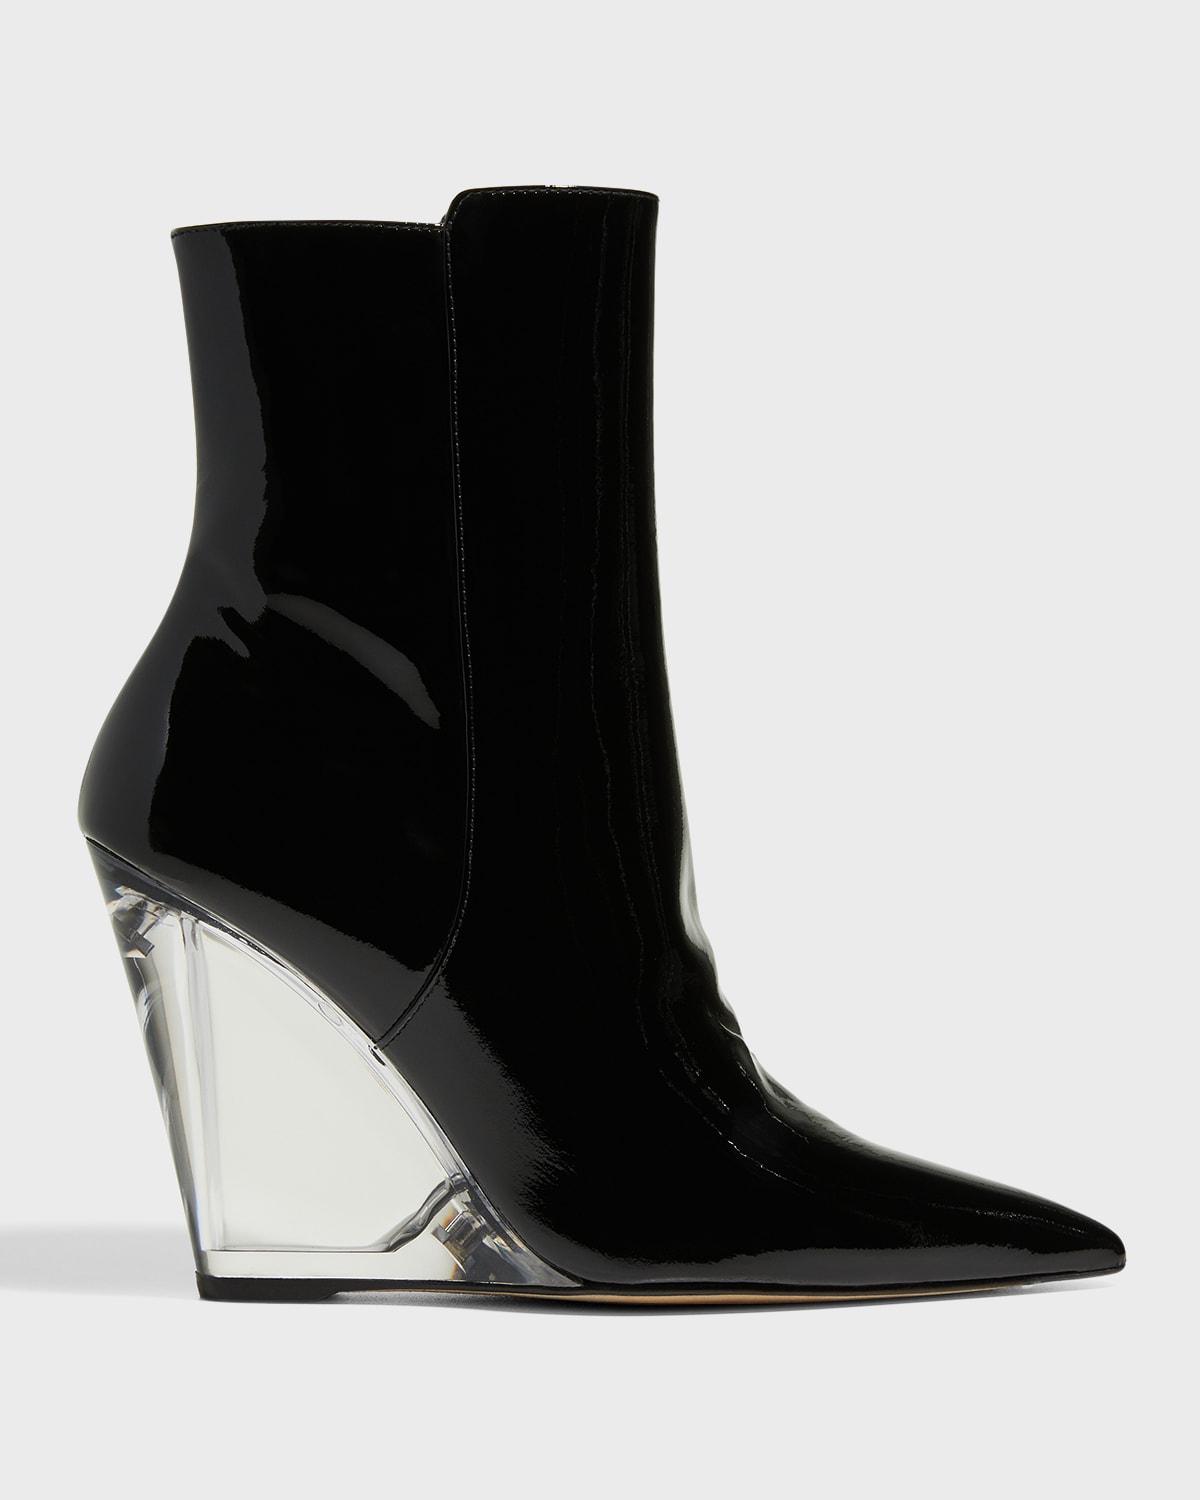 Patent Leather Bootie Shoes | Neiman Marcus